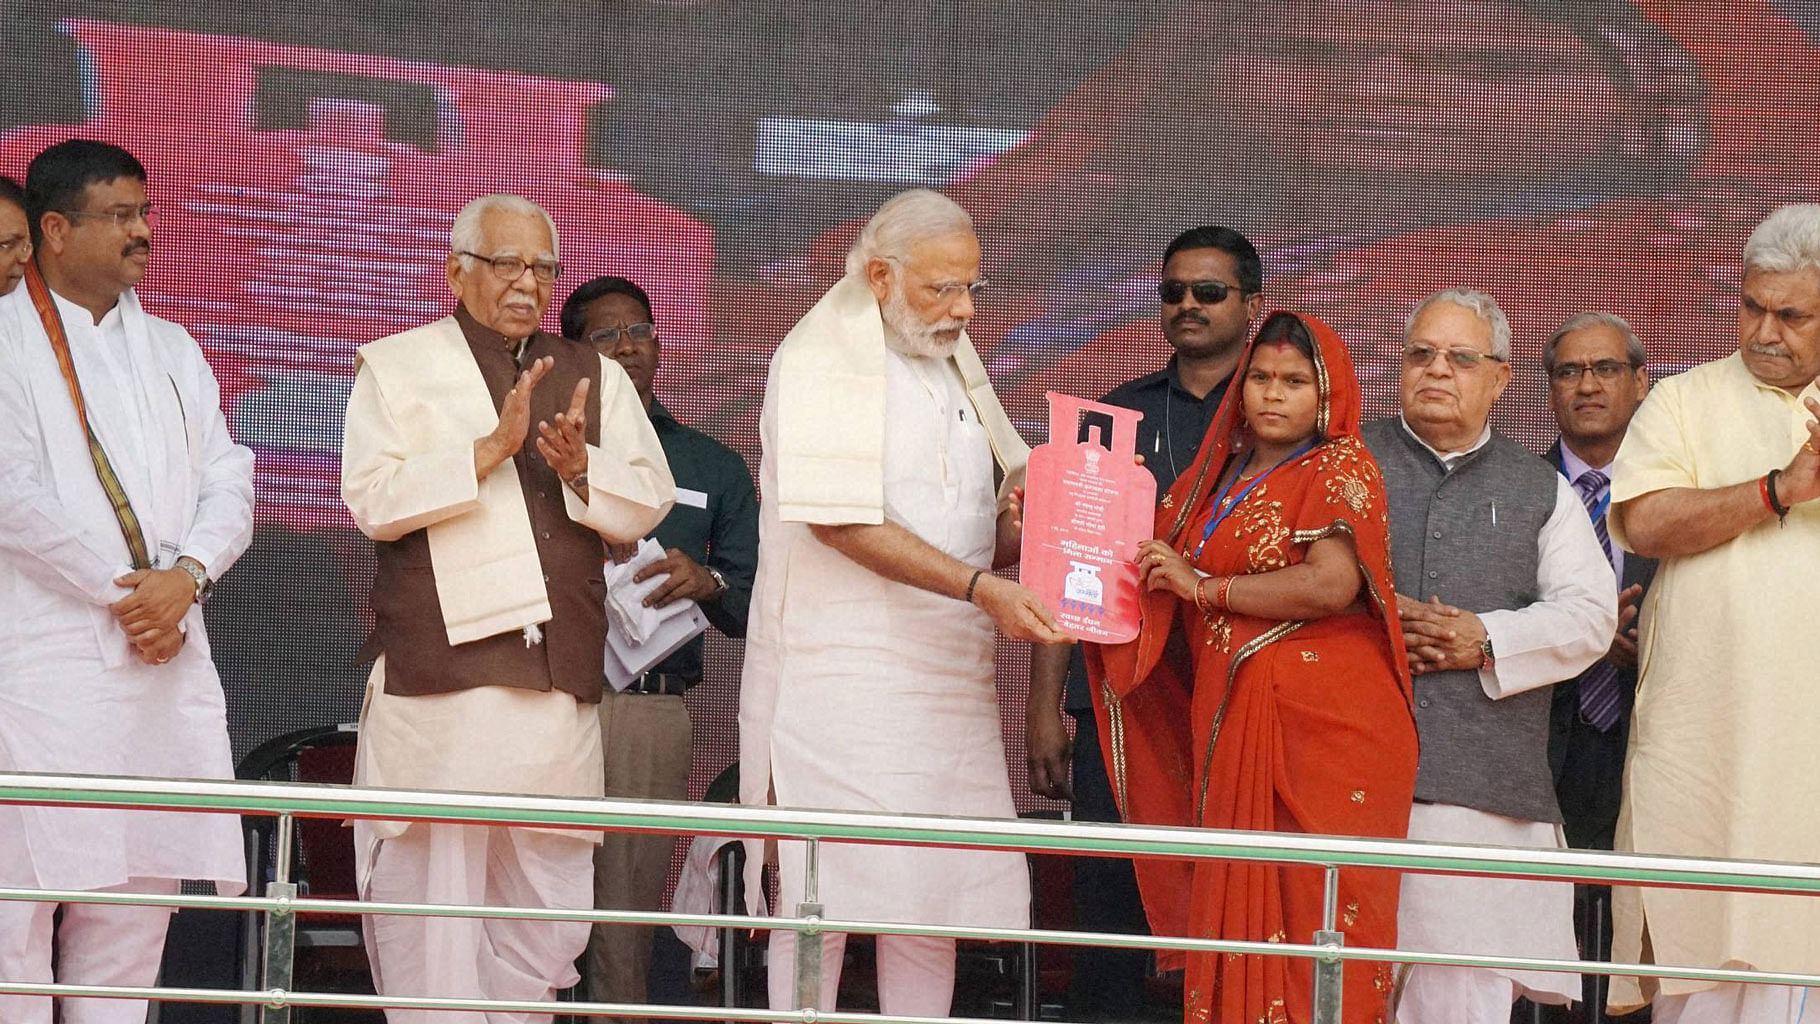 Prime Minister Narendra Modi presents cooking gas connection to a woman of a Below Poverty Line (BPL) family during the launch of the Pradhan Mantri Ujjwala Yojana in Ballia on Sunday. (Photo: PTI)